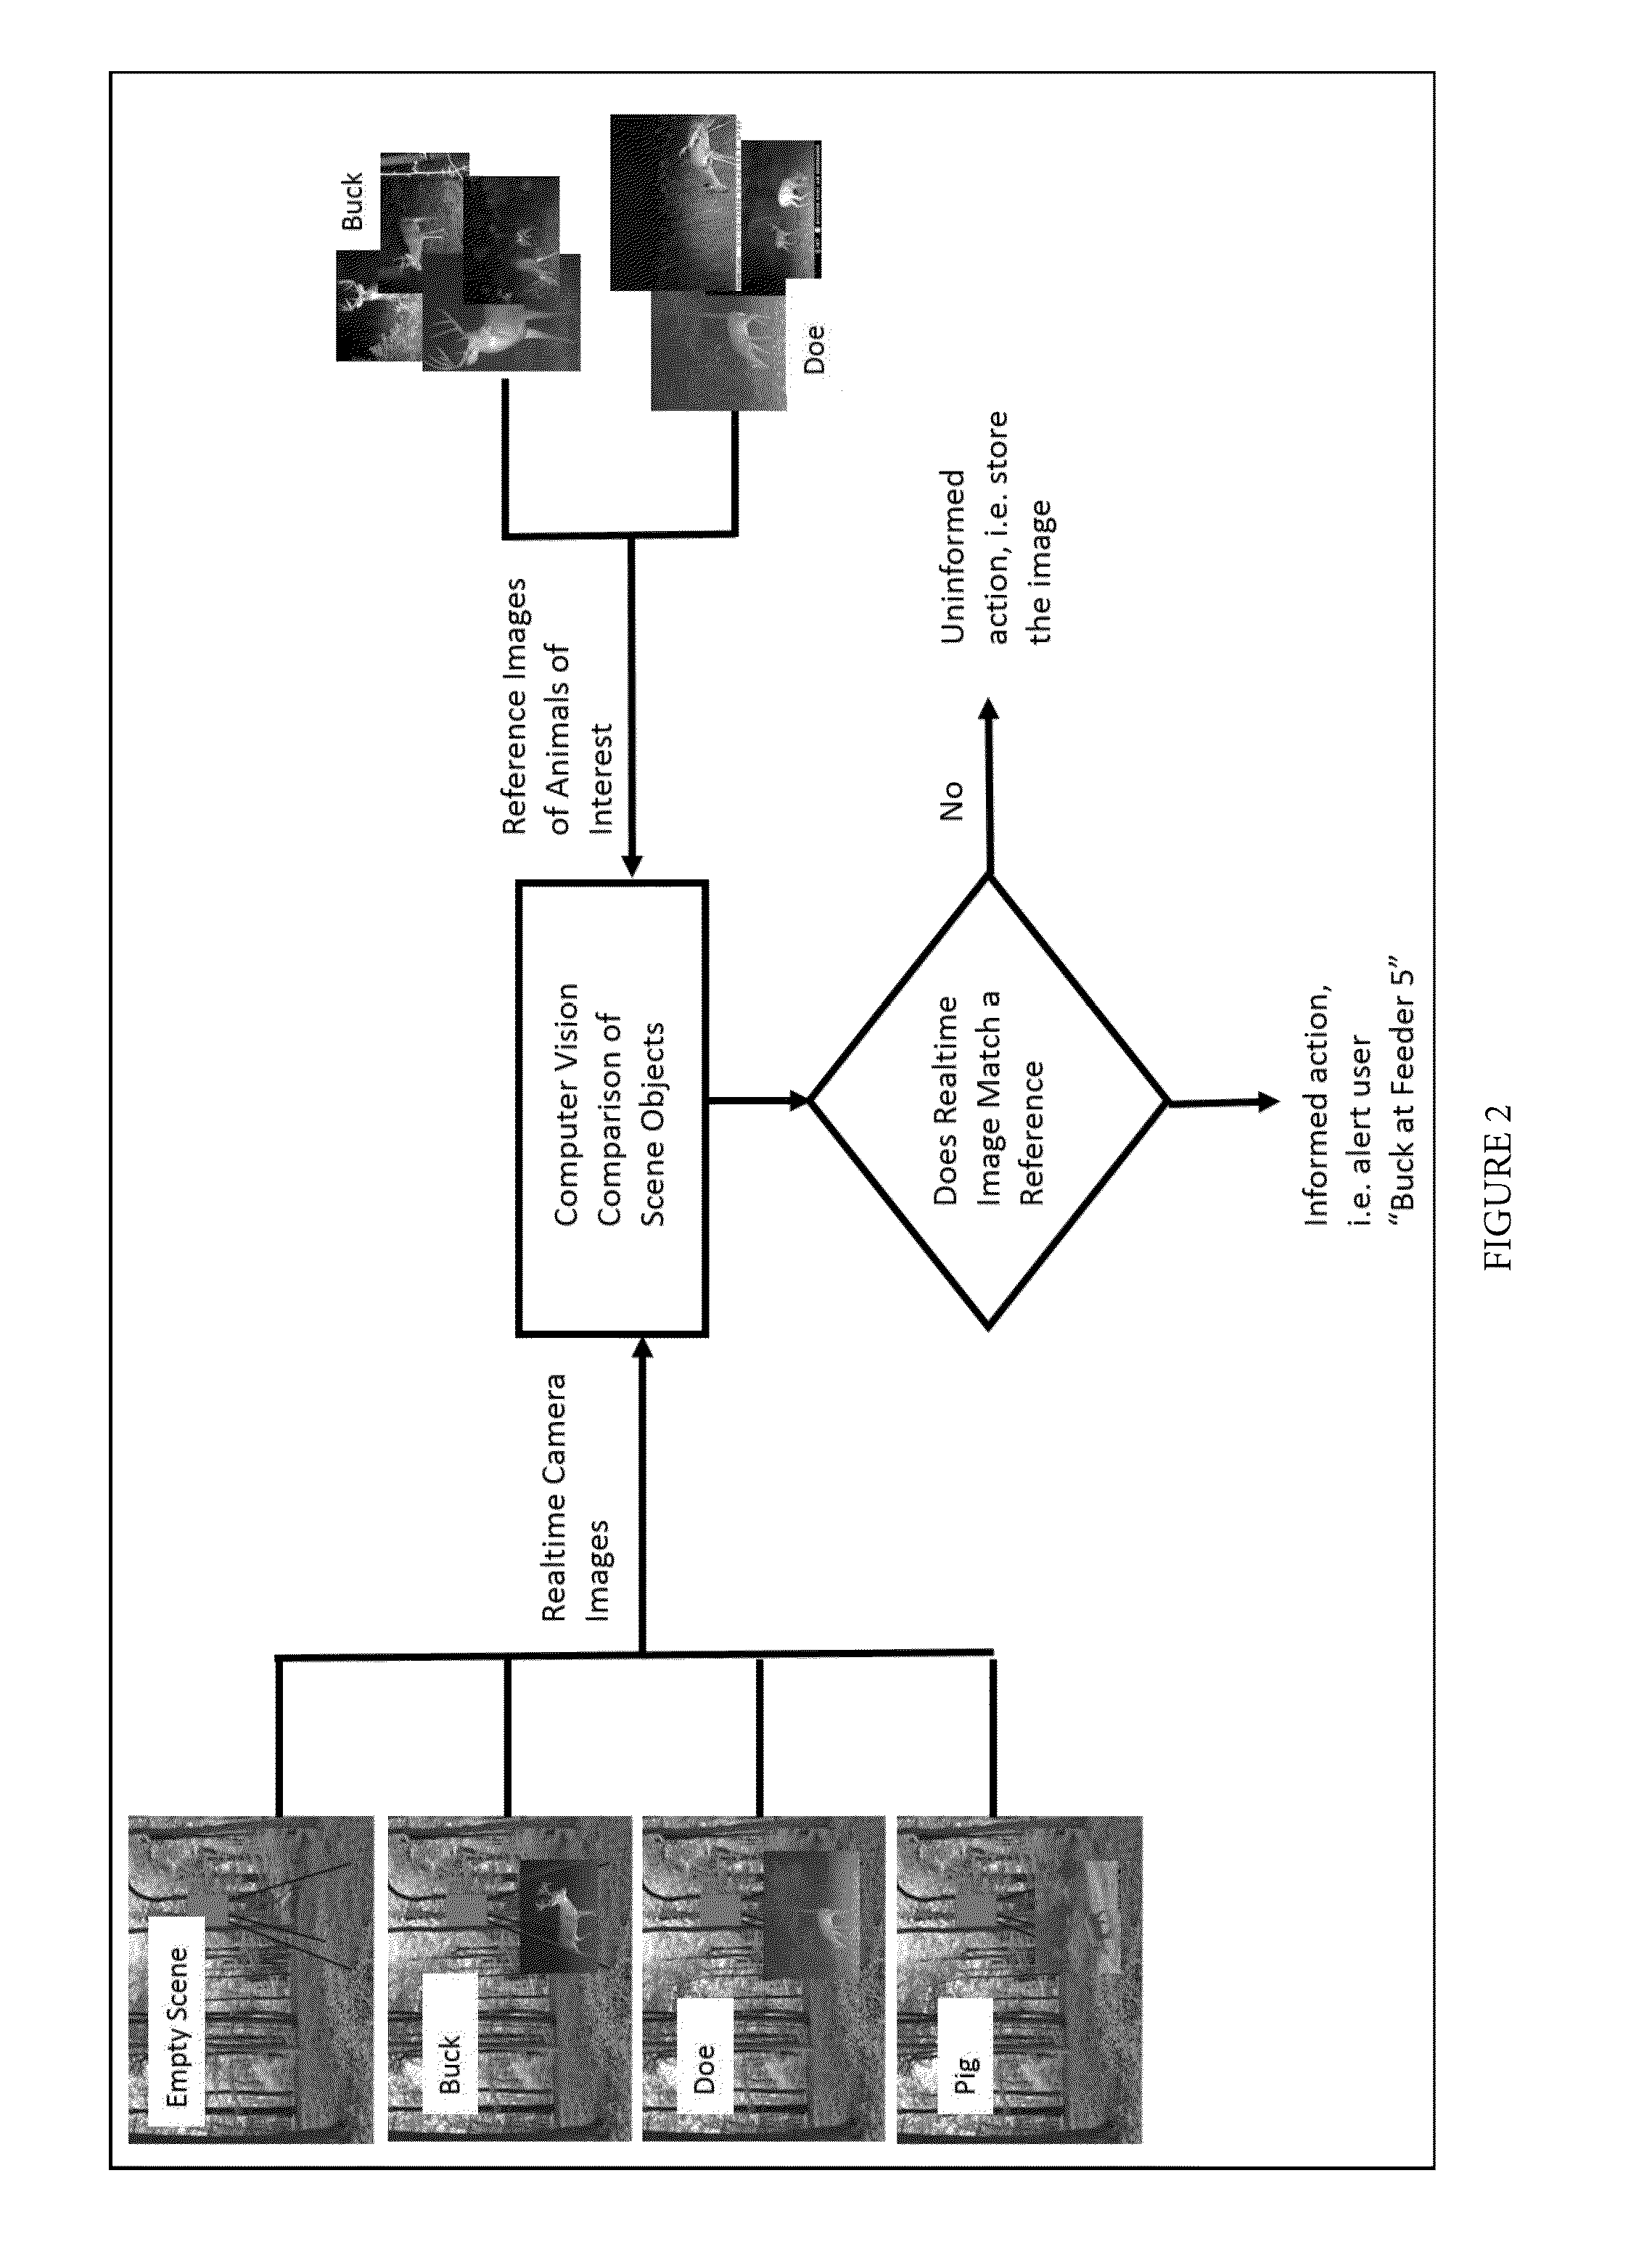 Alerting system for automatically detecting, categorizing, and locating animals using computer aided image comparisons